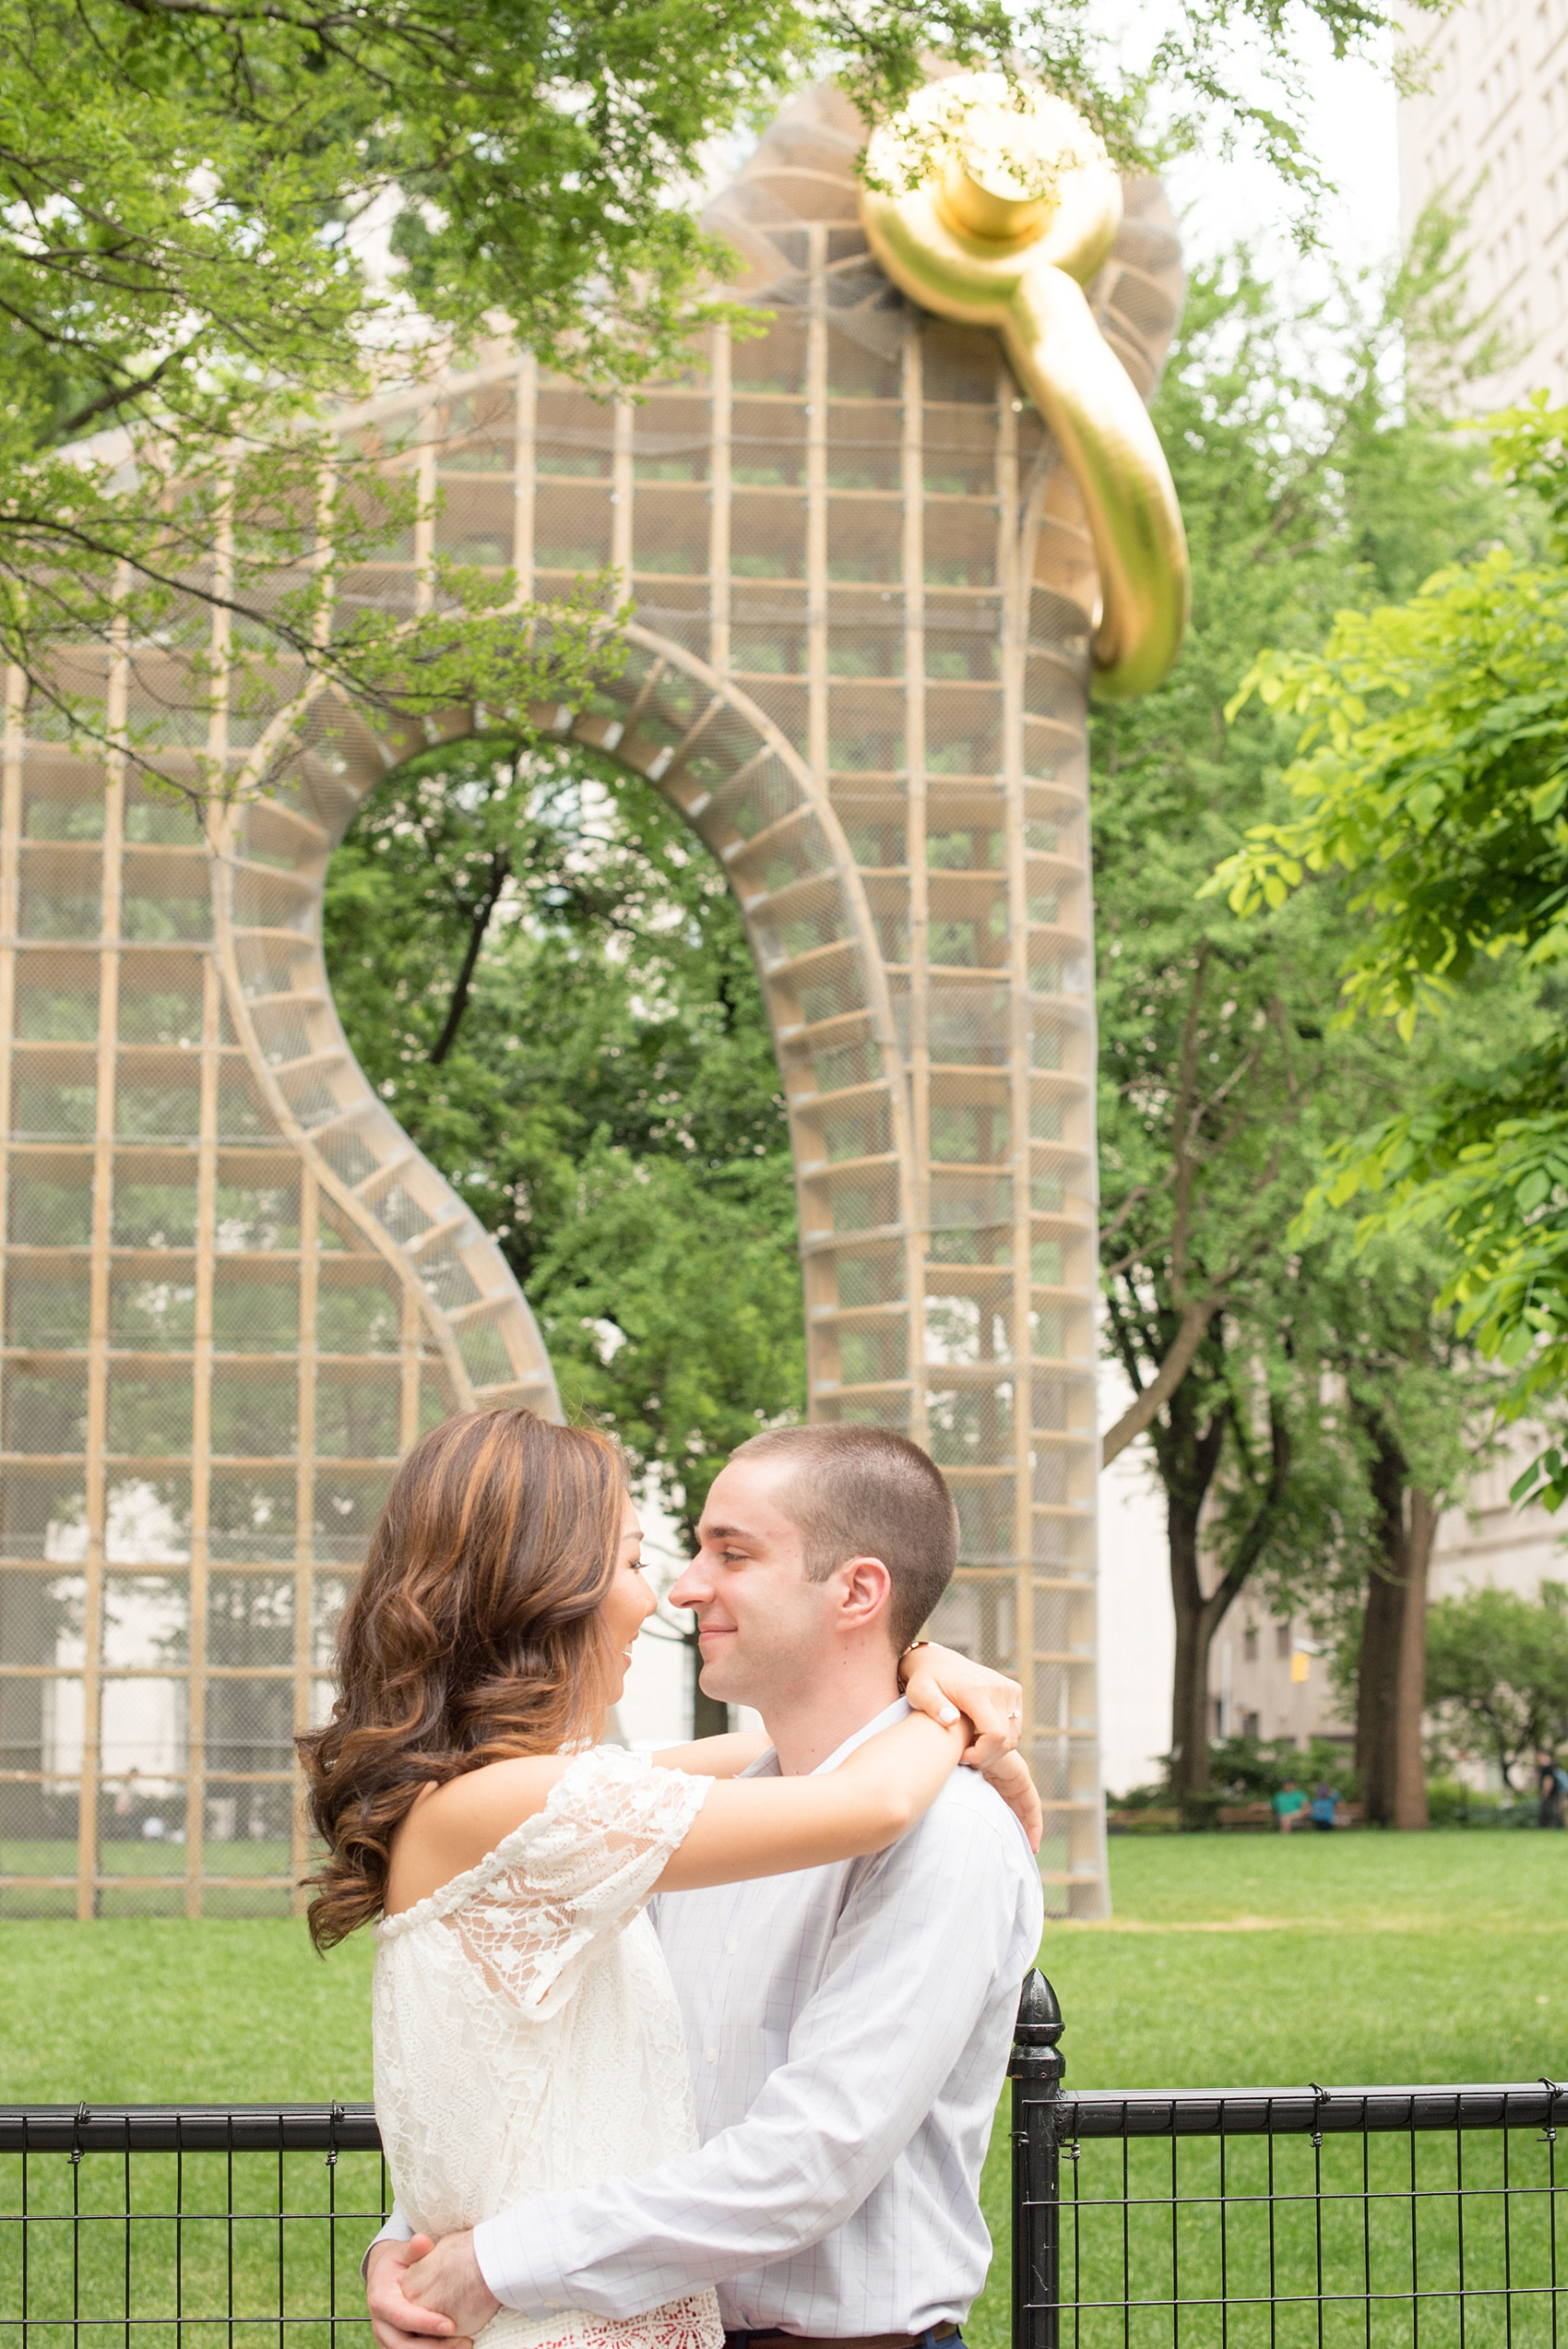 Mikkel Paige Photography photos of a Madison Square Park engagement session in NYC during spring. The bride wore an off-the-shoulder white lace top and orange shorts.